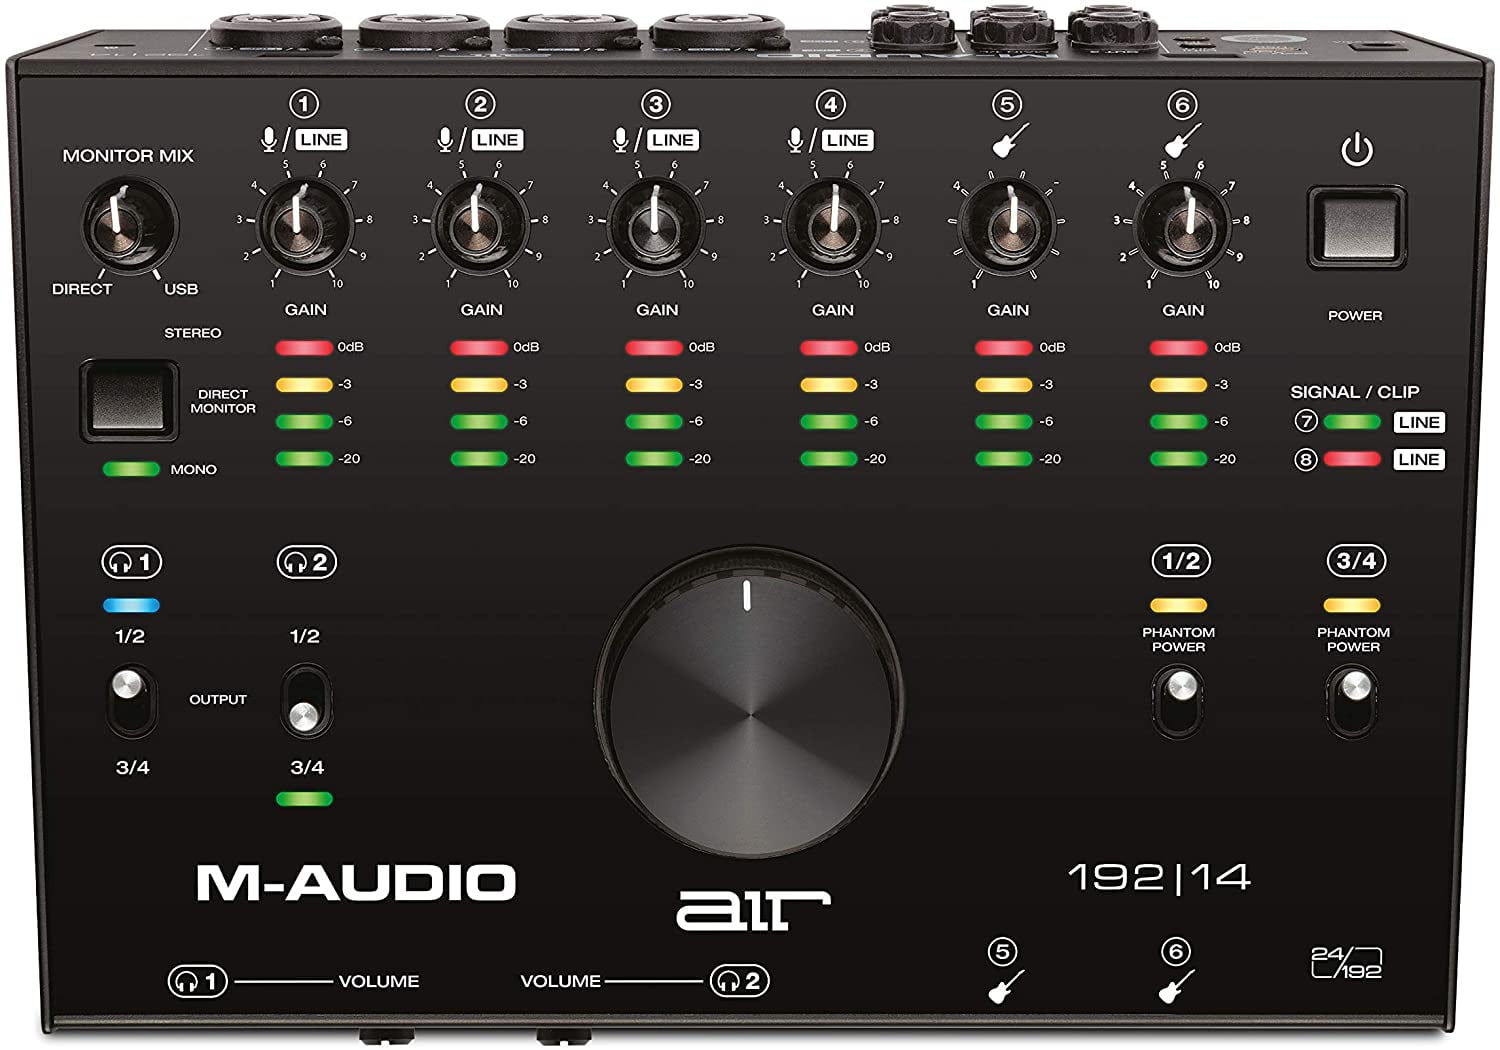 M-Audio AIR 192|14 - 8-In 4-Out USB Audio / MIDI Interface with Recording  Software from Pro-Tools & Ableton Live, Plus Studio-Grade FX & Instruments